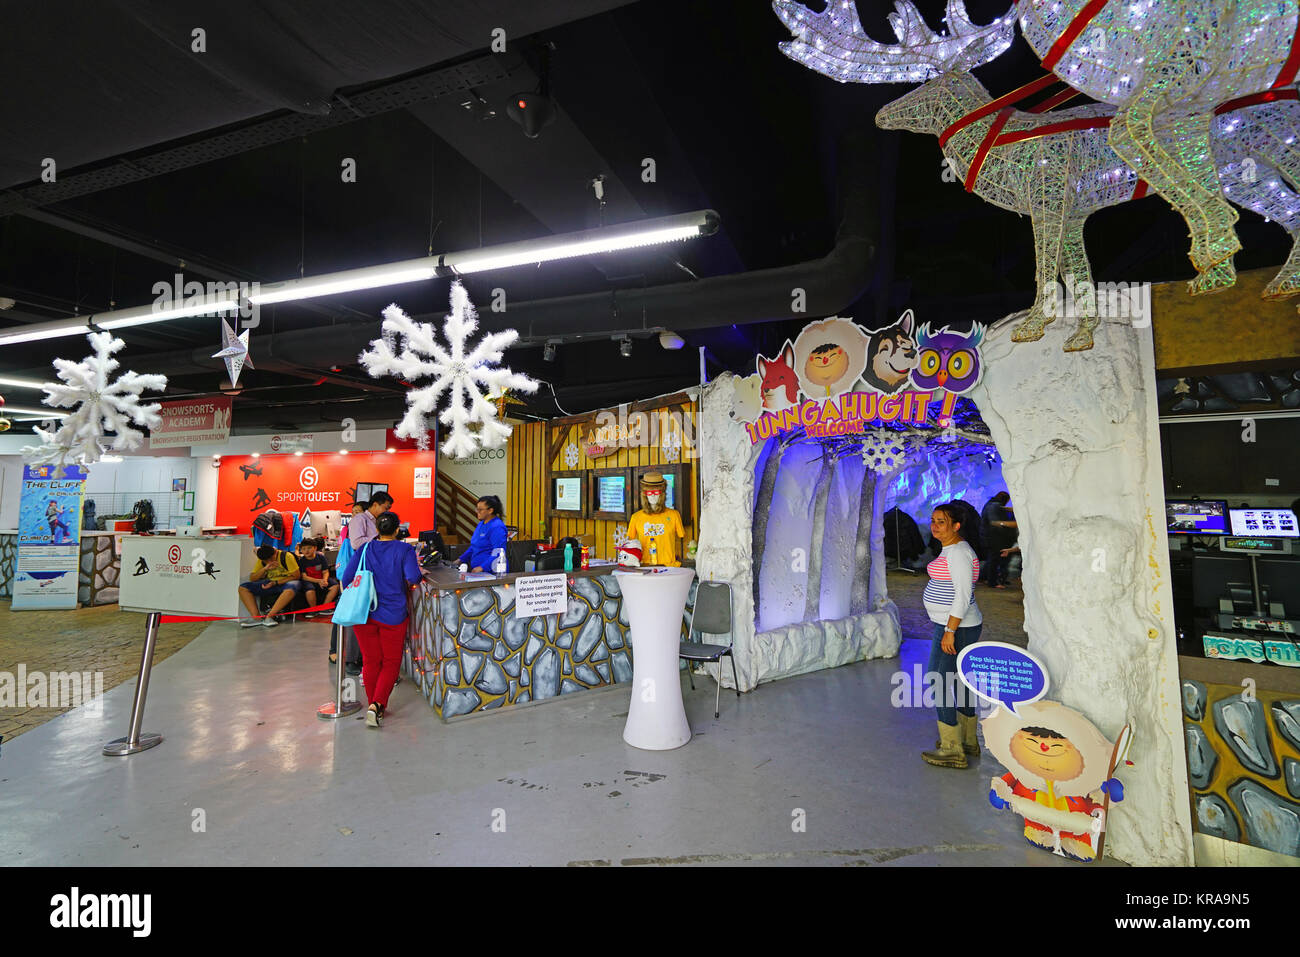 View of Snow City, an indoor snow centre located within the Science Centre in Jurong East, Singapore Stock Photo